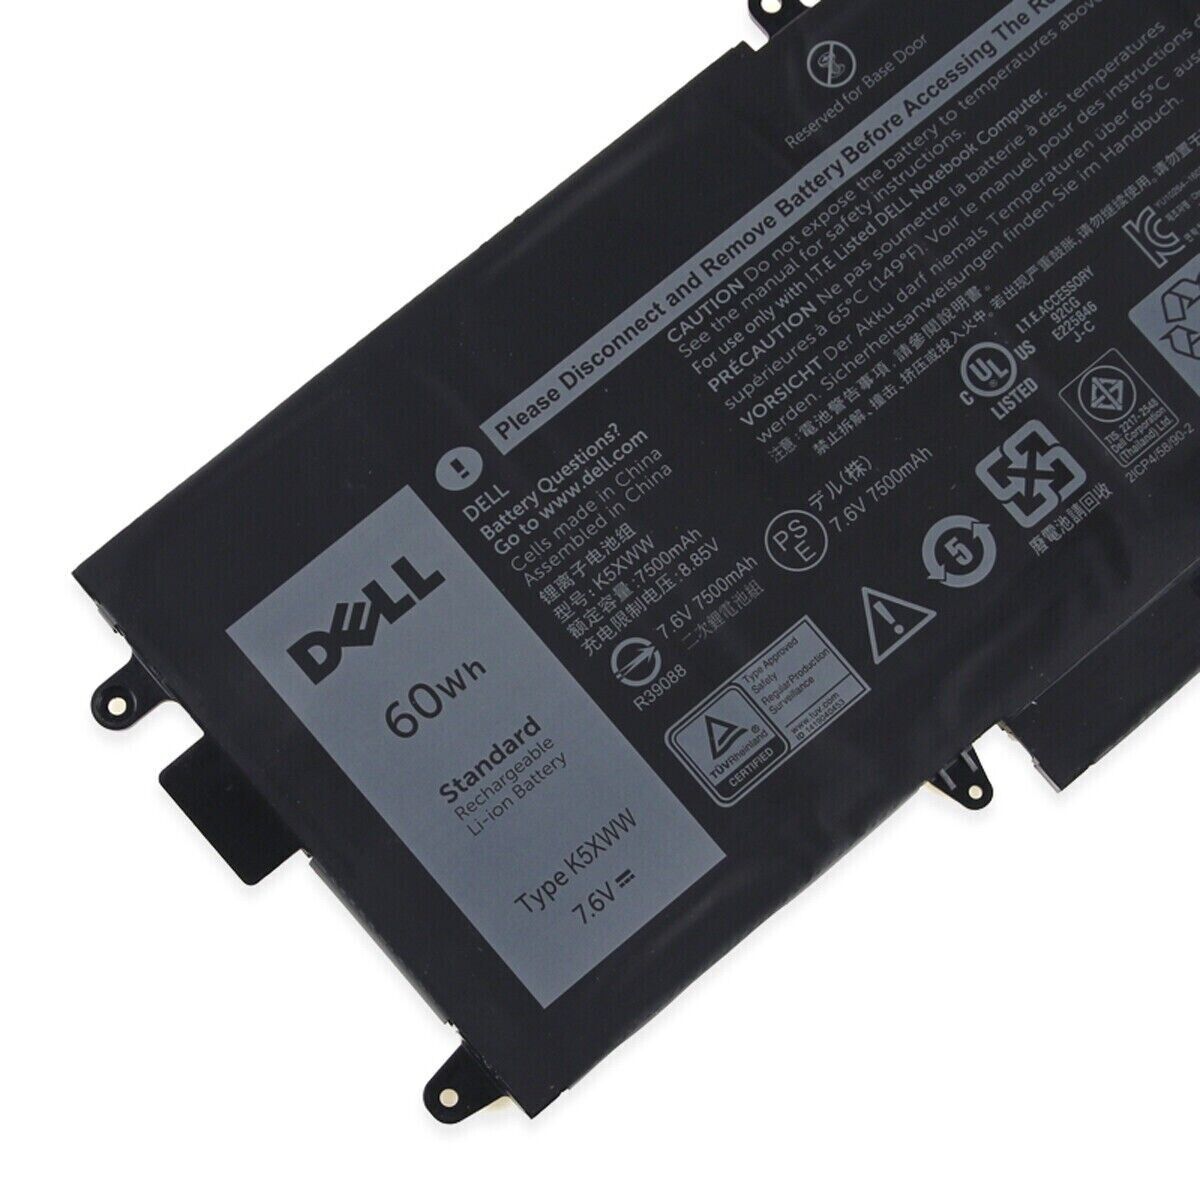 OEM K5XWW Battery For Dell Latitude 5289 7389 7390 2in1 L3180 Series 6CYH6 71TG4